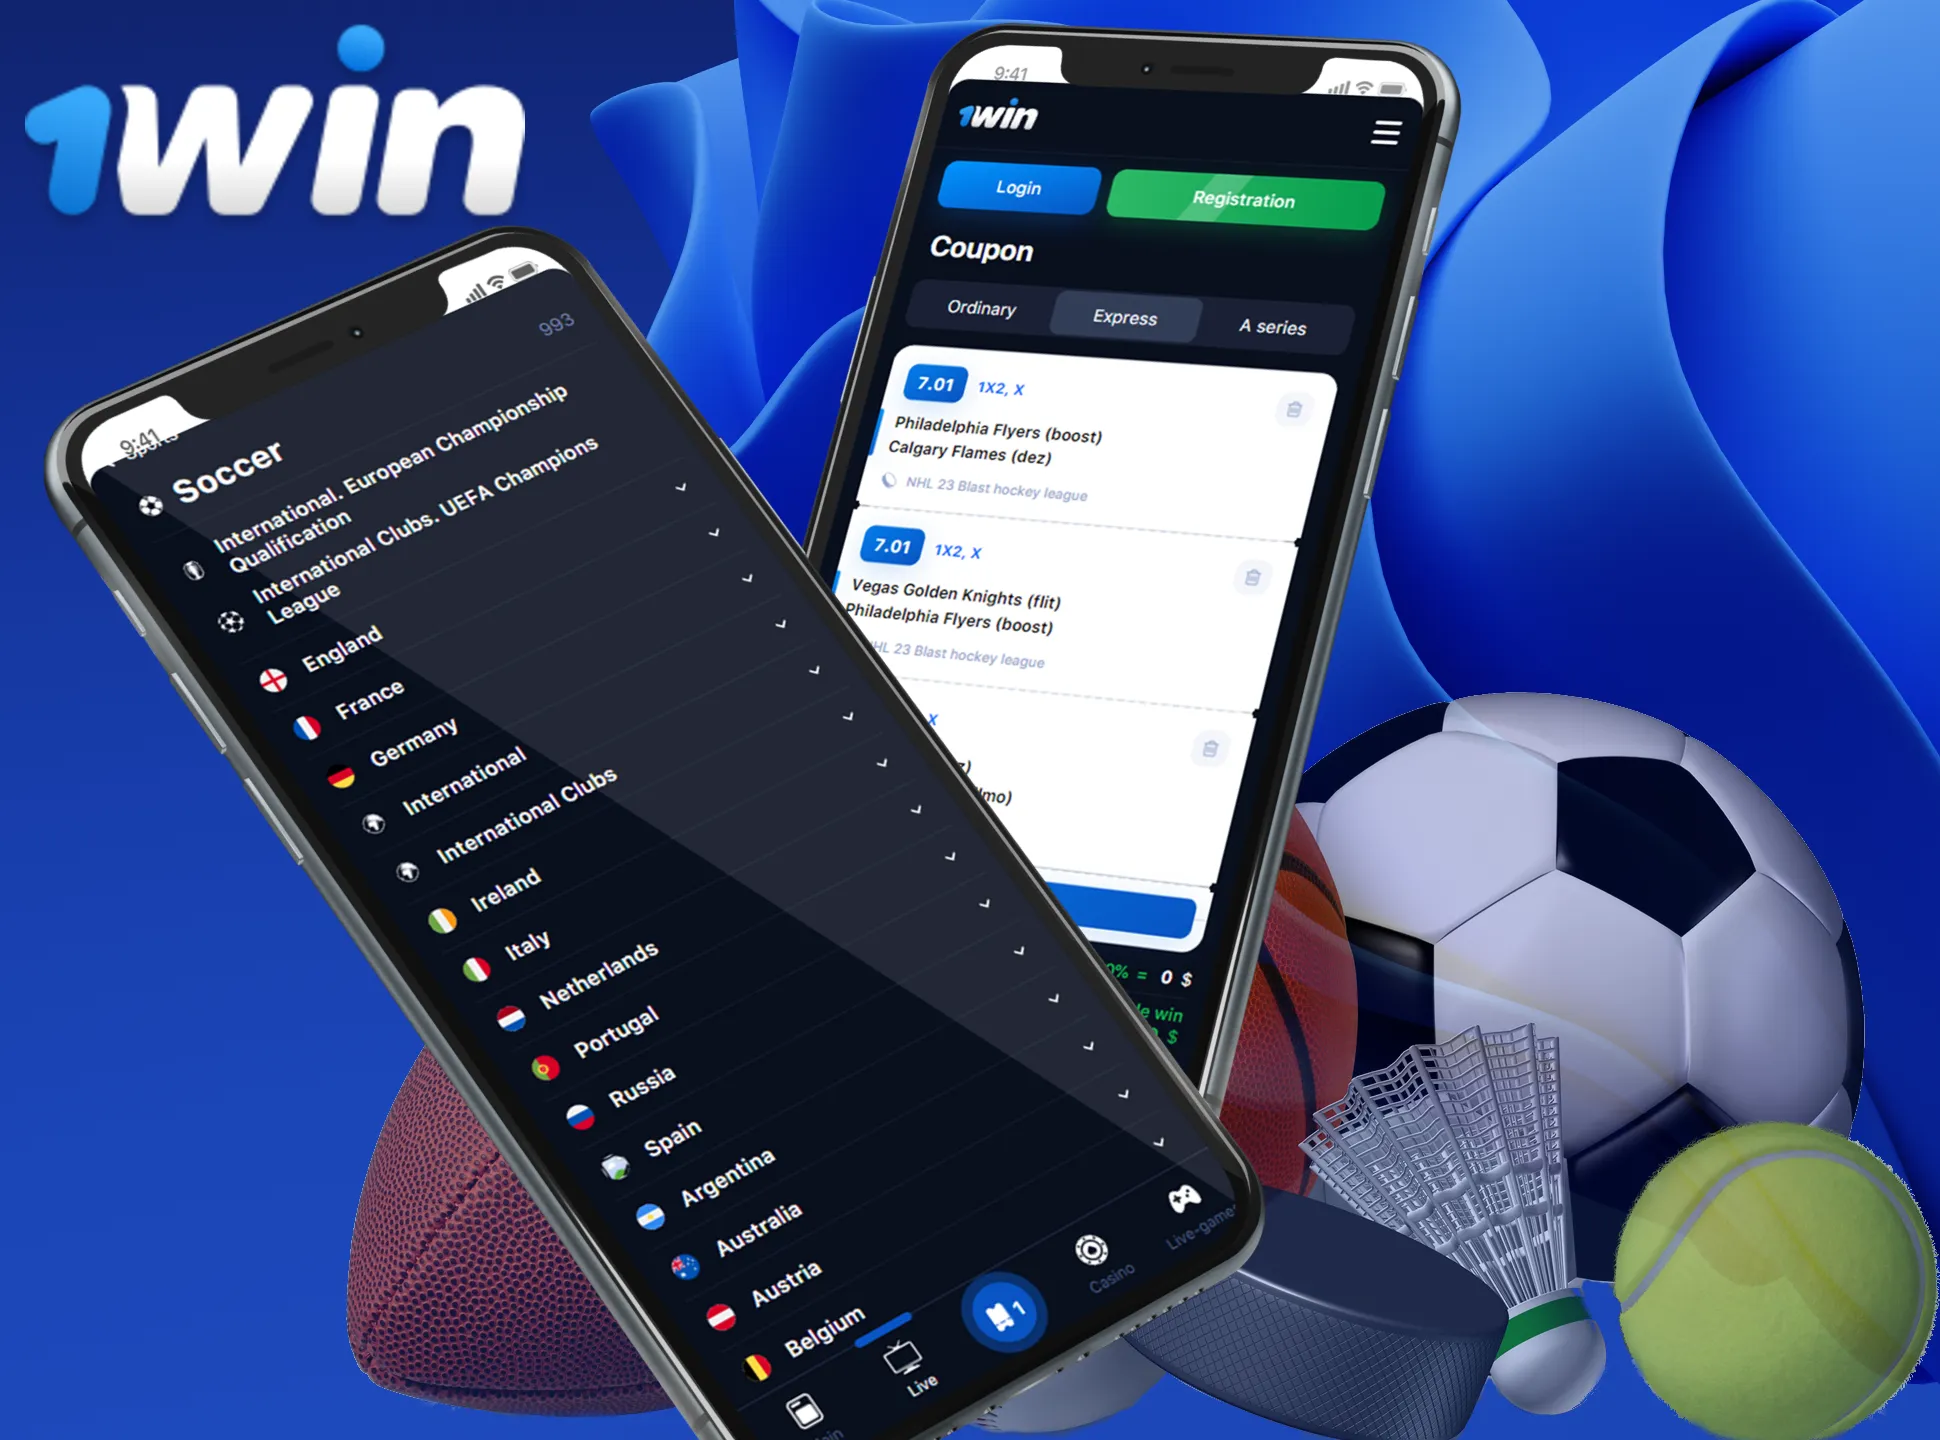 You will find lots of different sports to bet on in the 1win app.